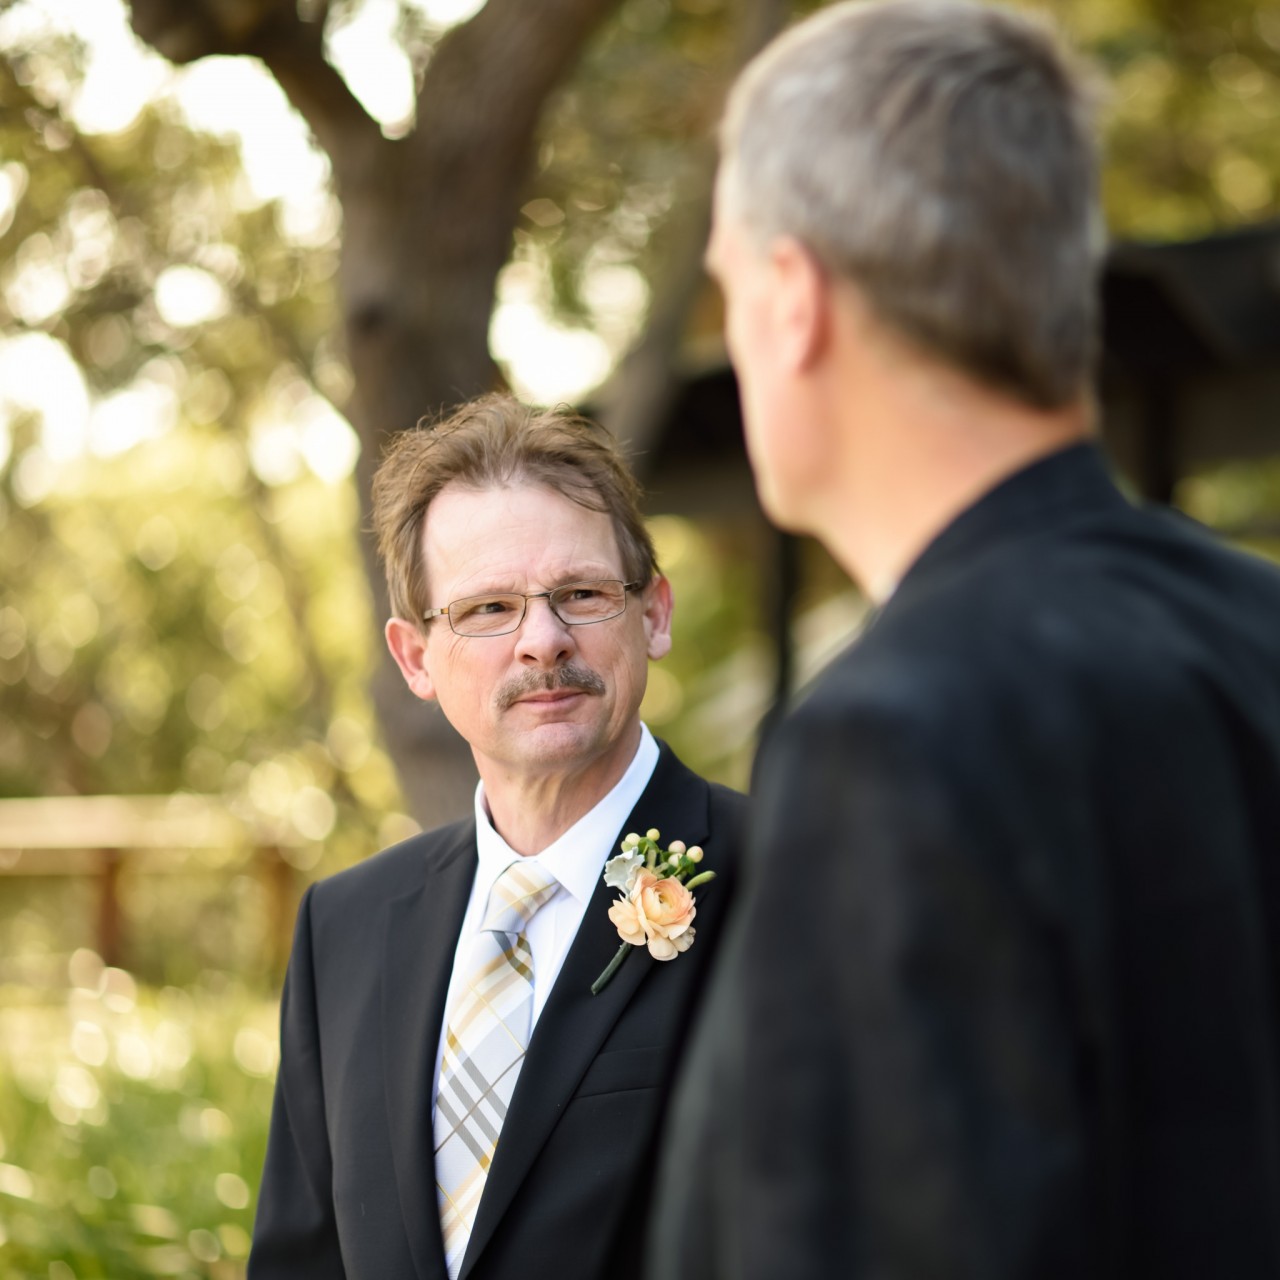 Father of the groom talking to a guest